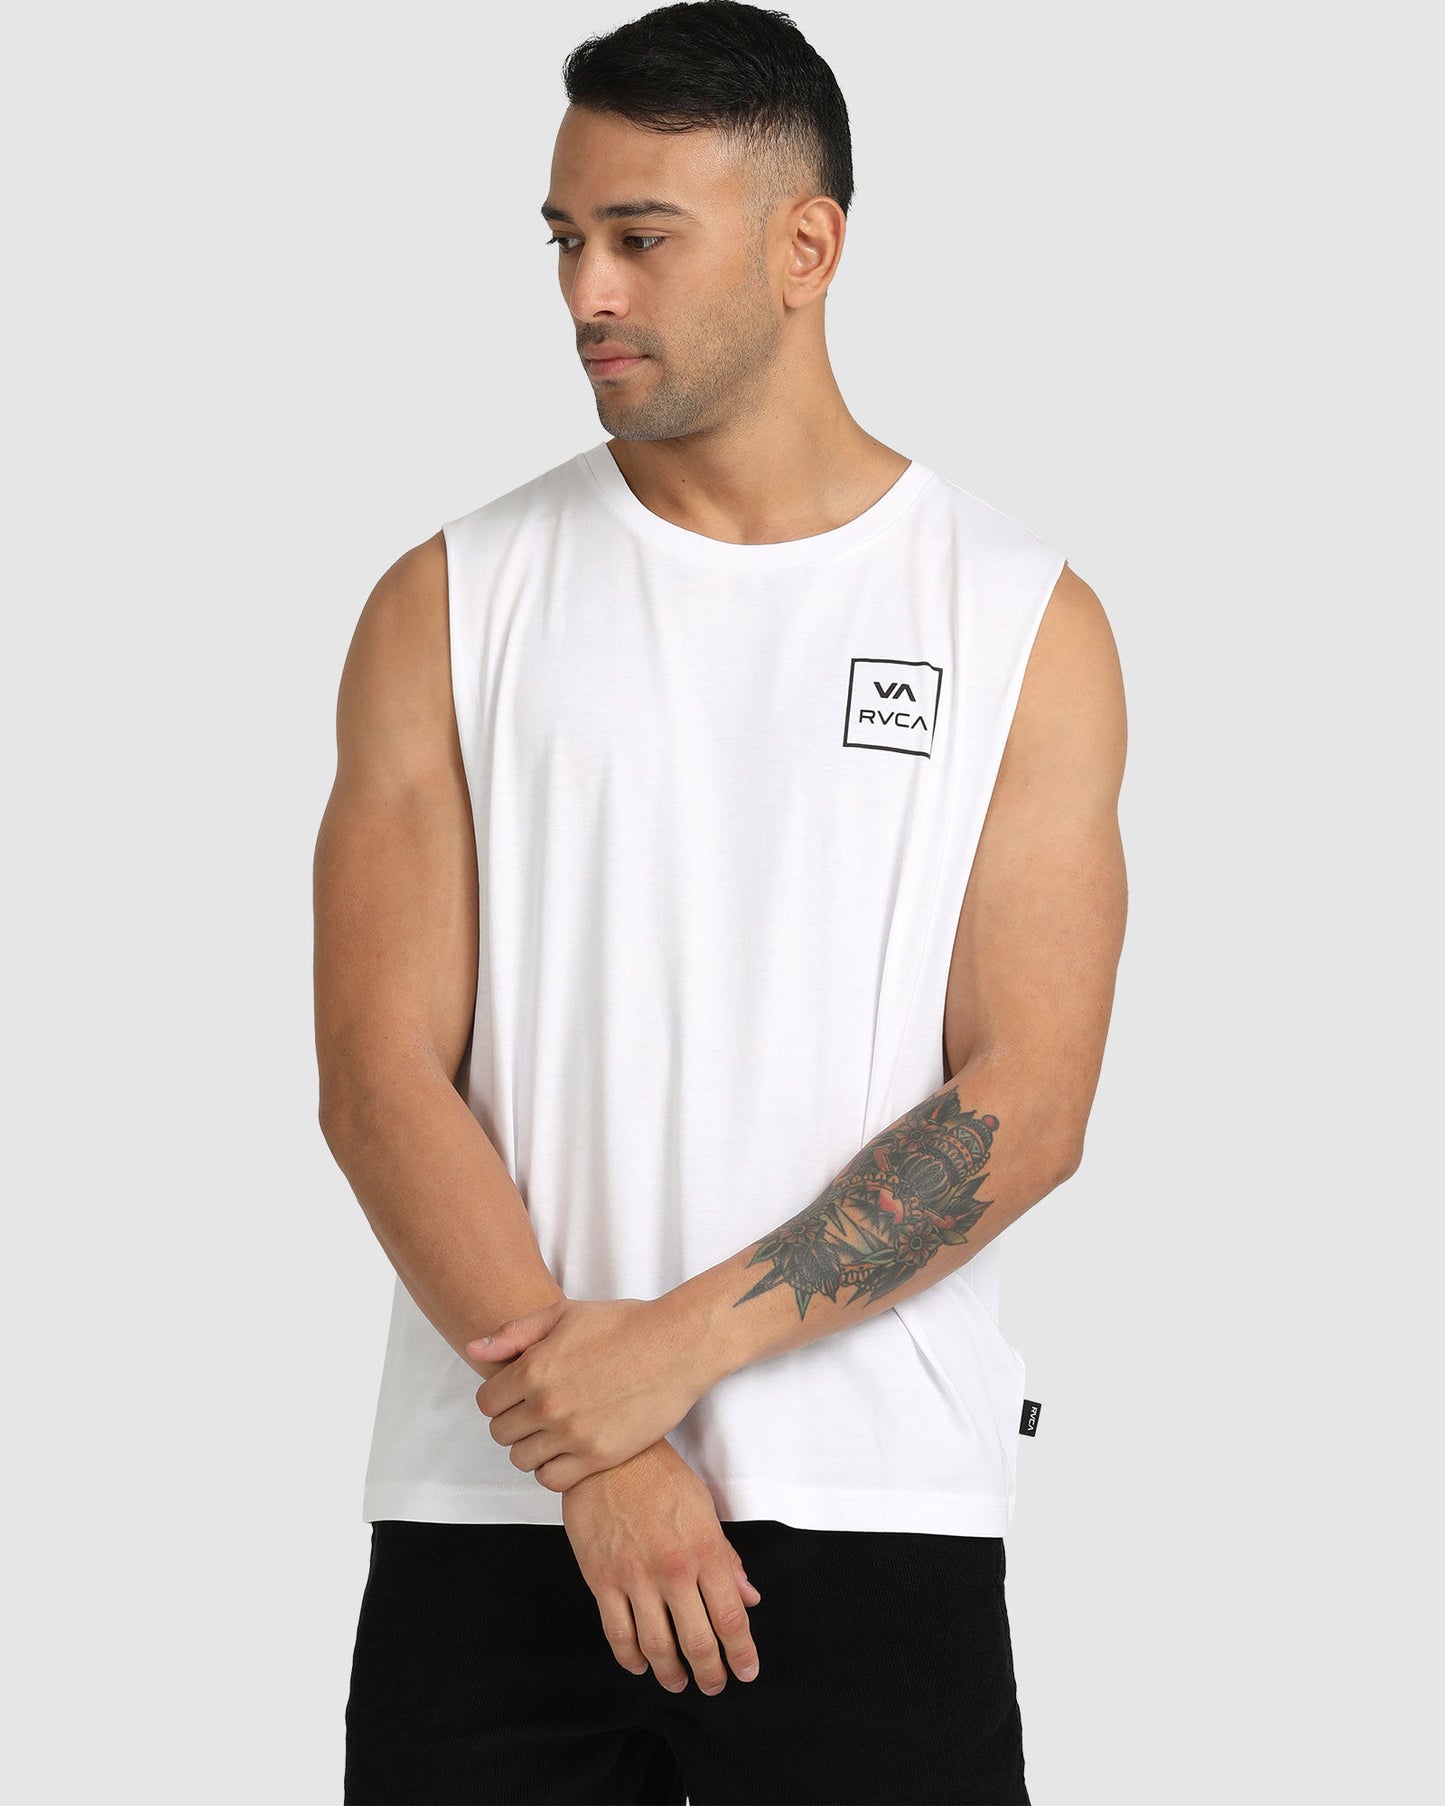 RVCA VA All The Ways Muscle Tee in white from front